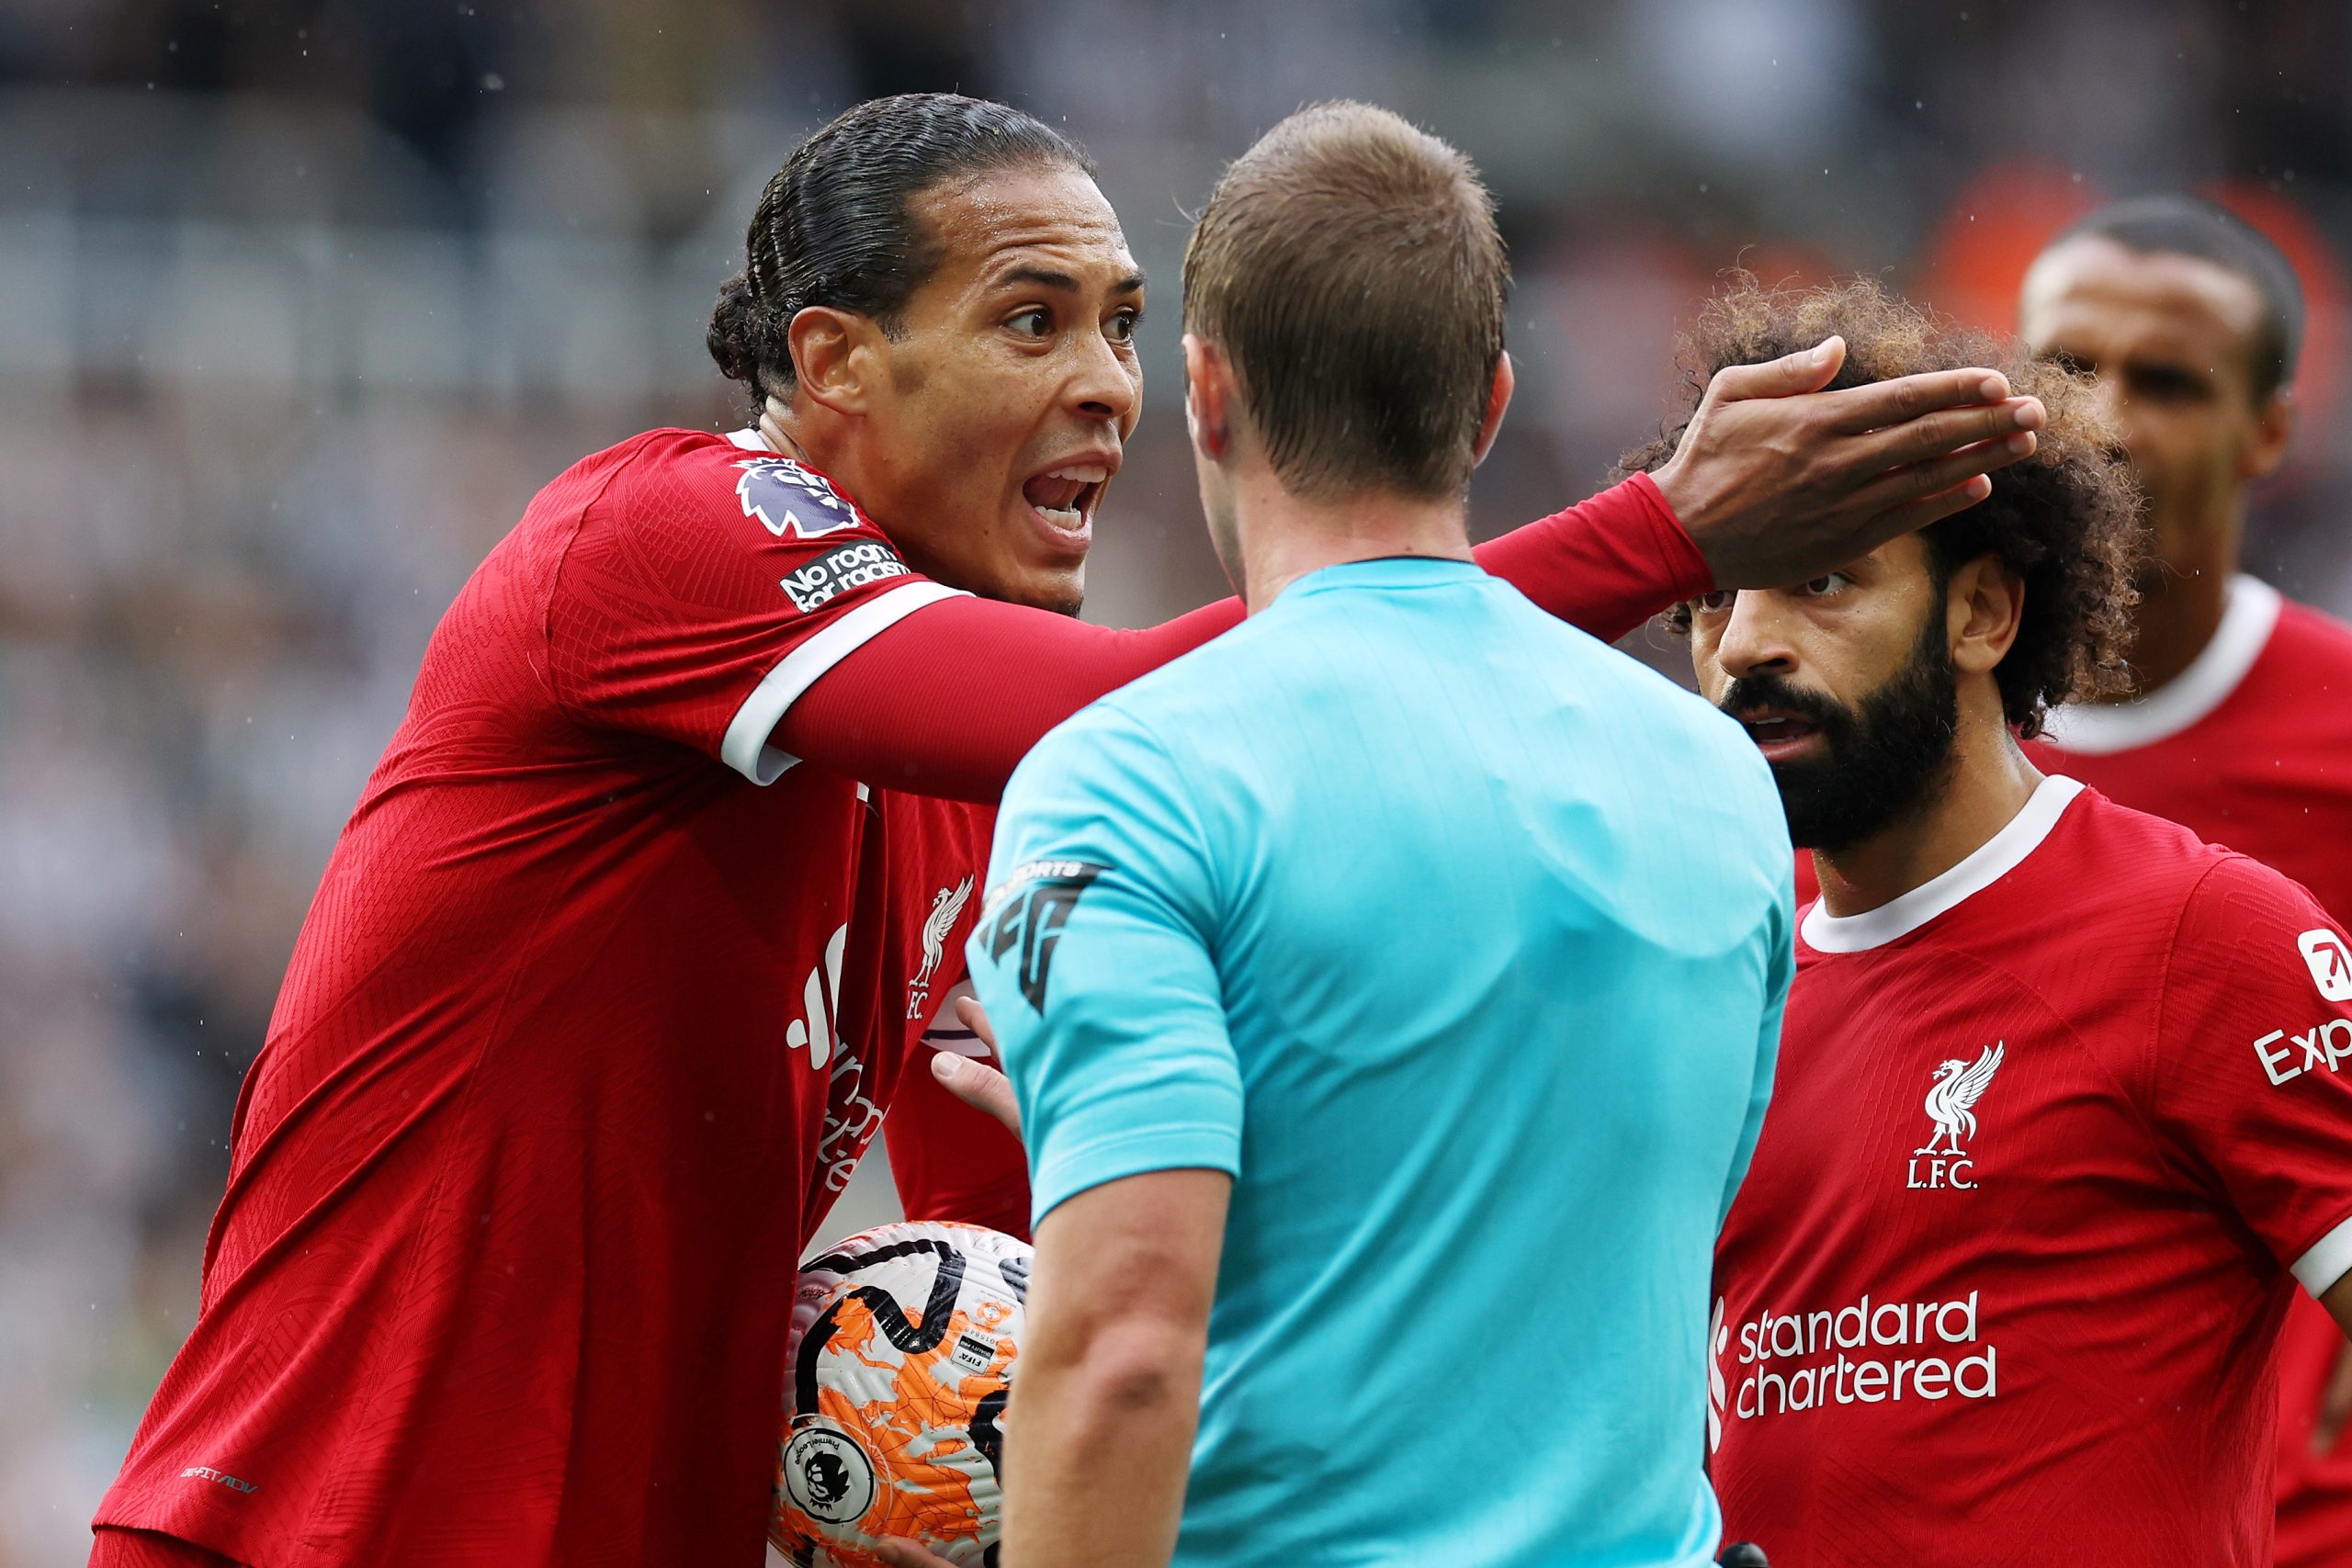 Virgil van Dijk gets into more trouble with the 'Law'